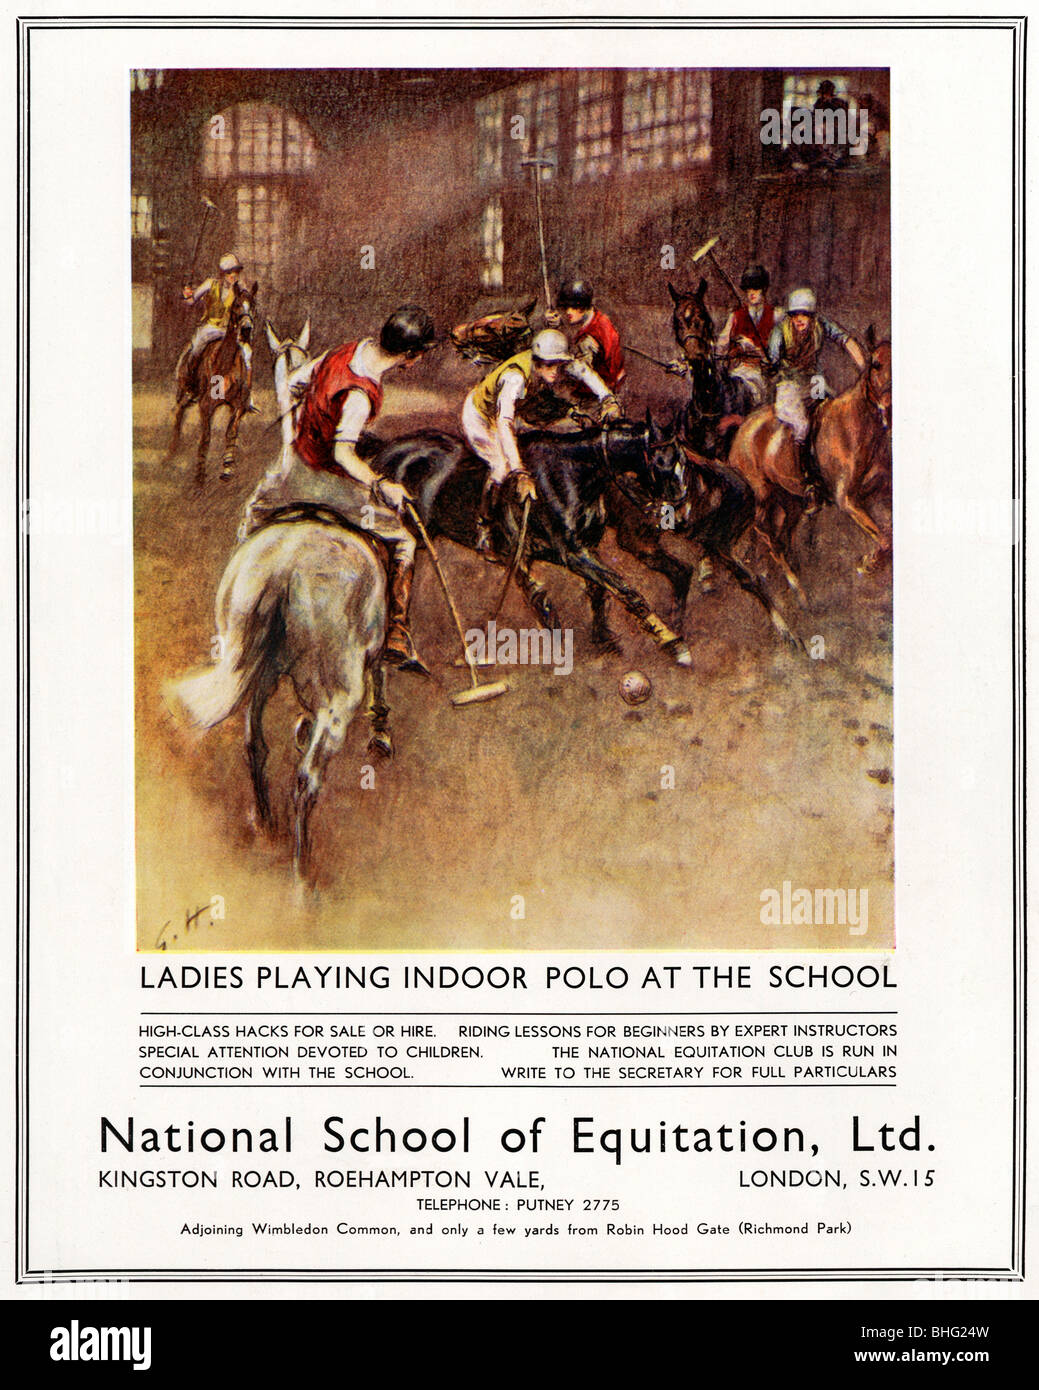 National School of Equitation, 1931 advert for the riding school in Roehampton, ladies playing indoor polo Stock Photo